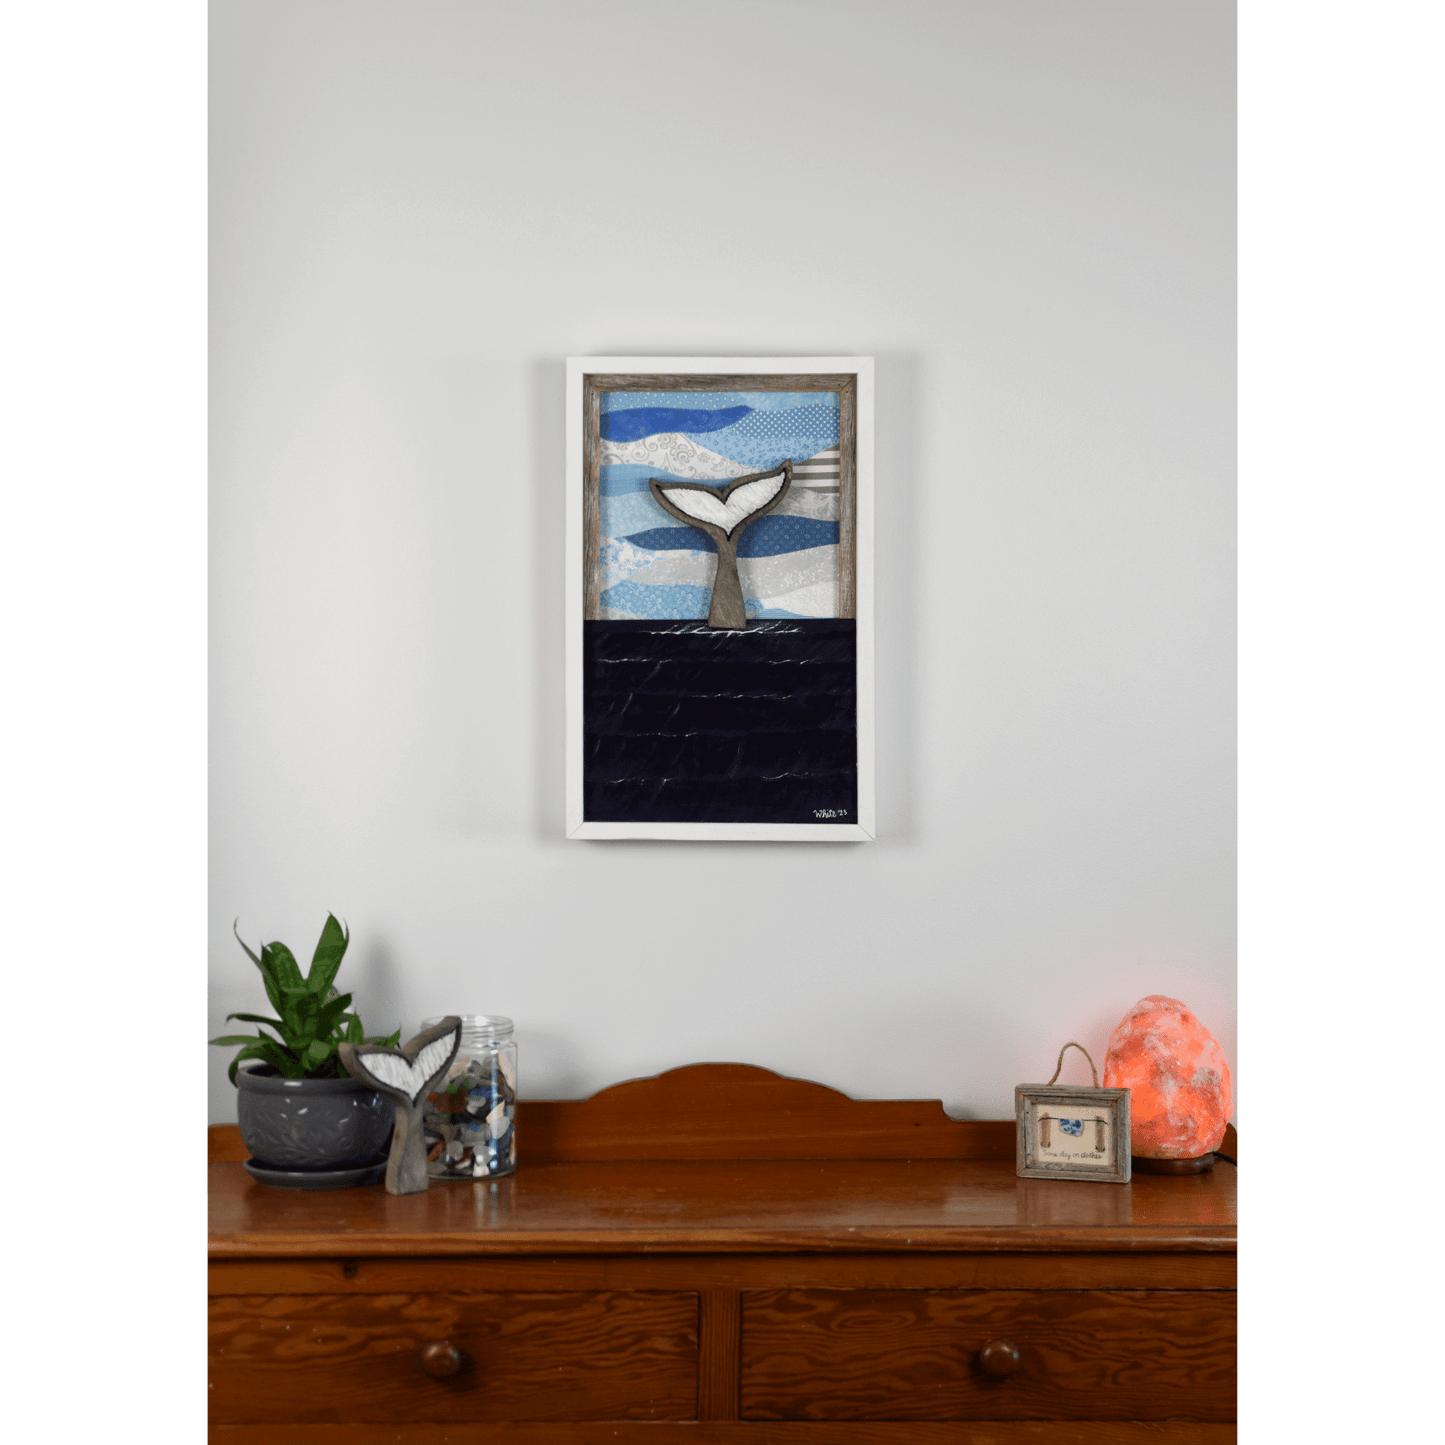 Shop for Newfoundland driftwood art at The White's Emporium. This mixed-media piece shows a whale tail diving into the water against a quilted fabric sky.